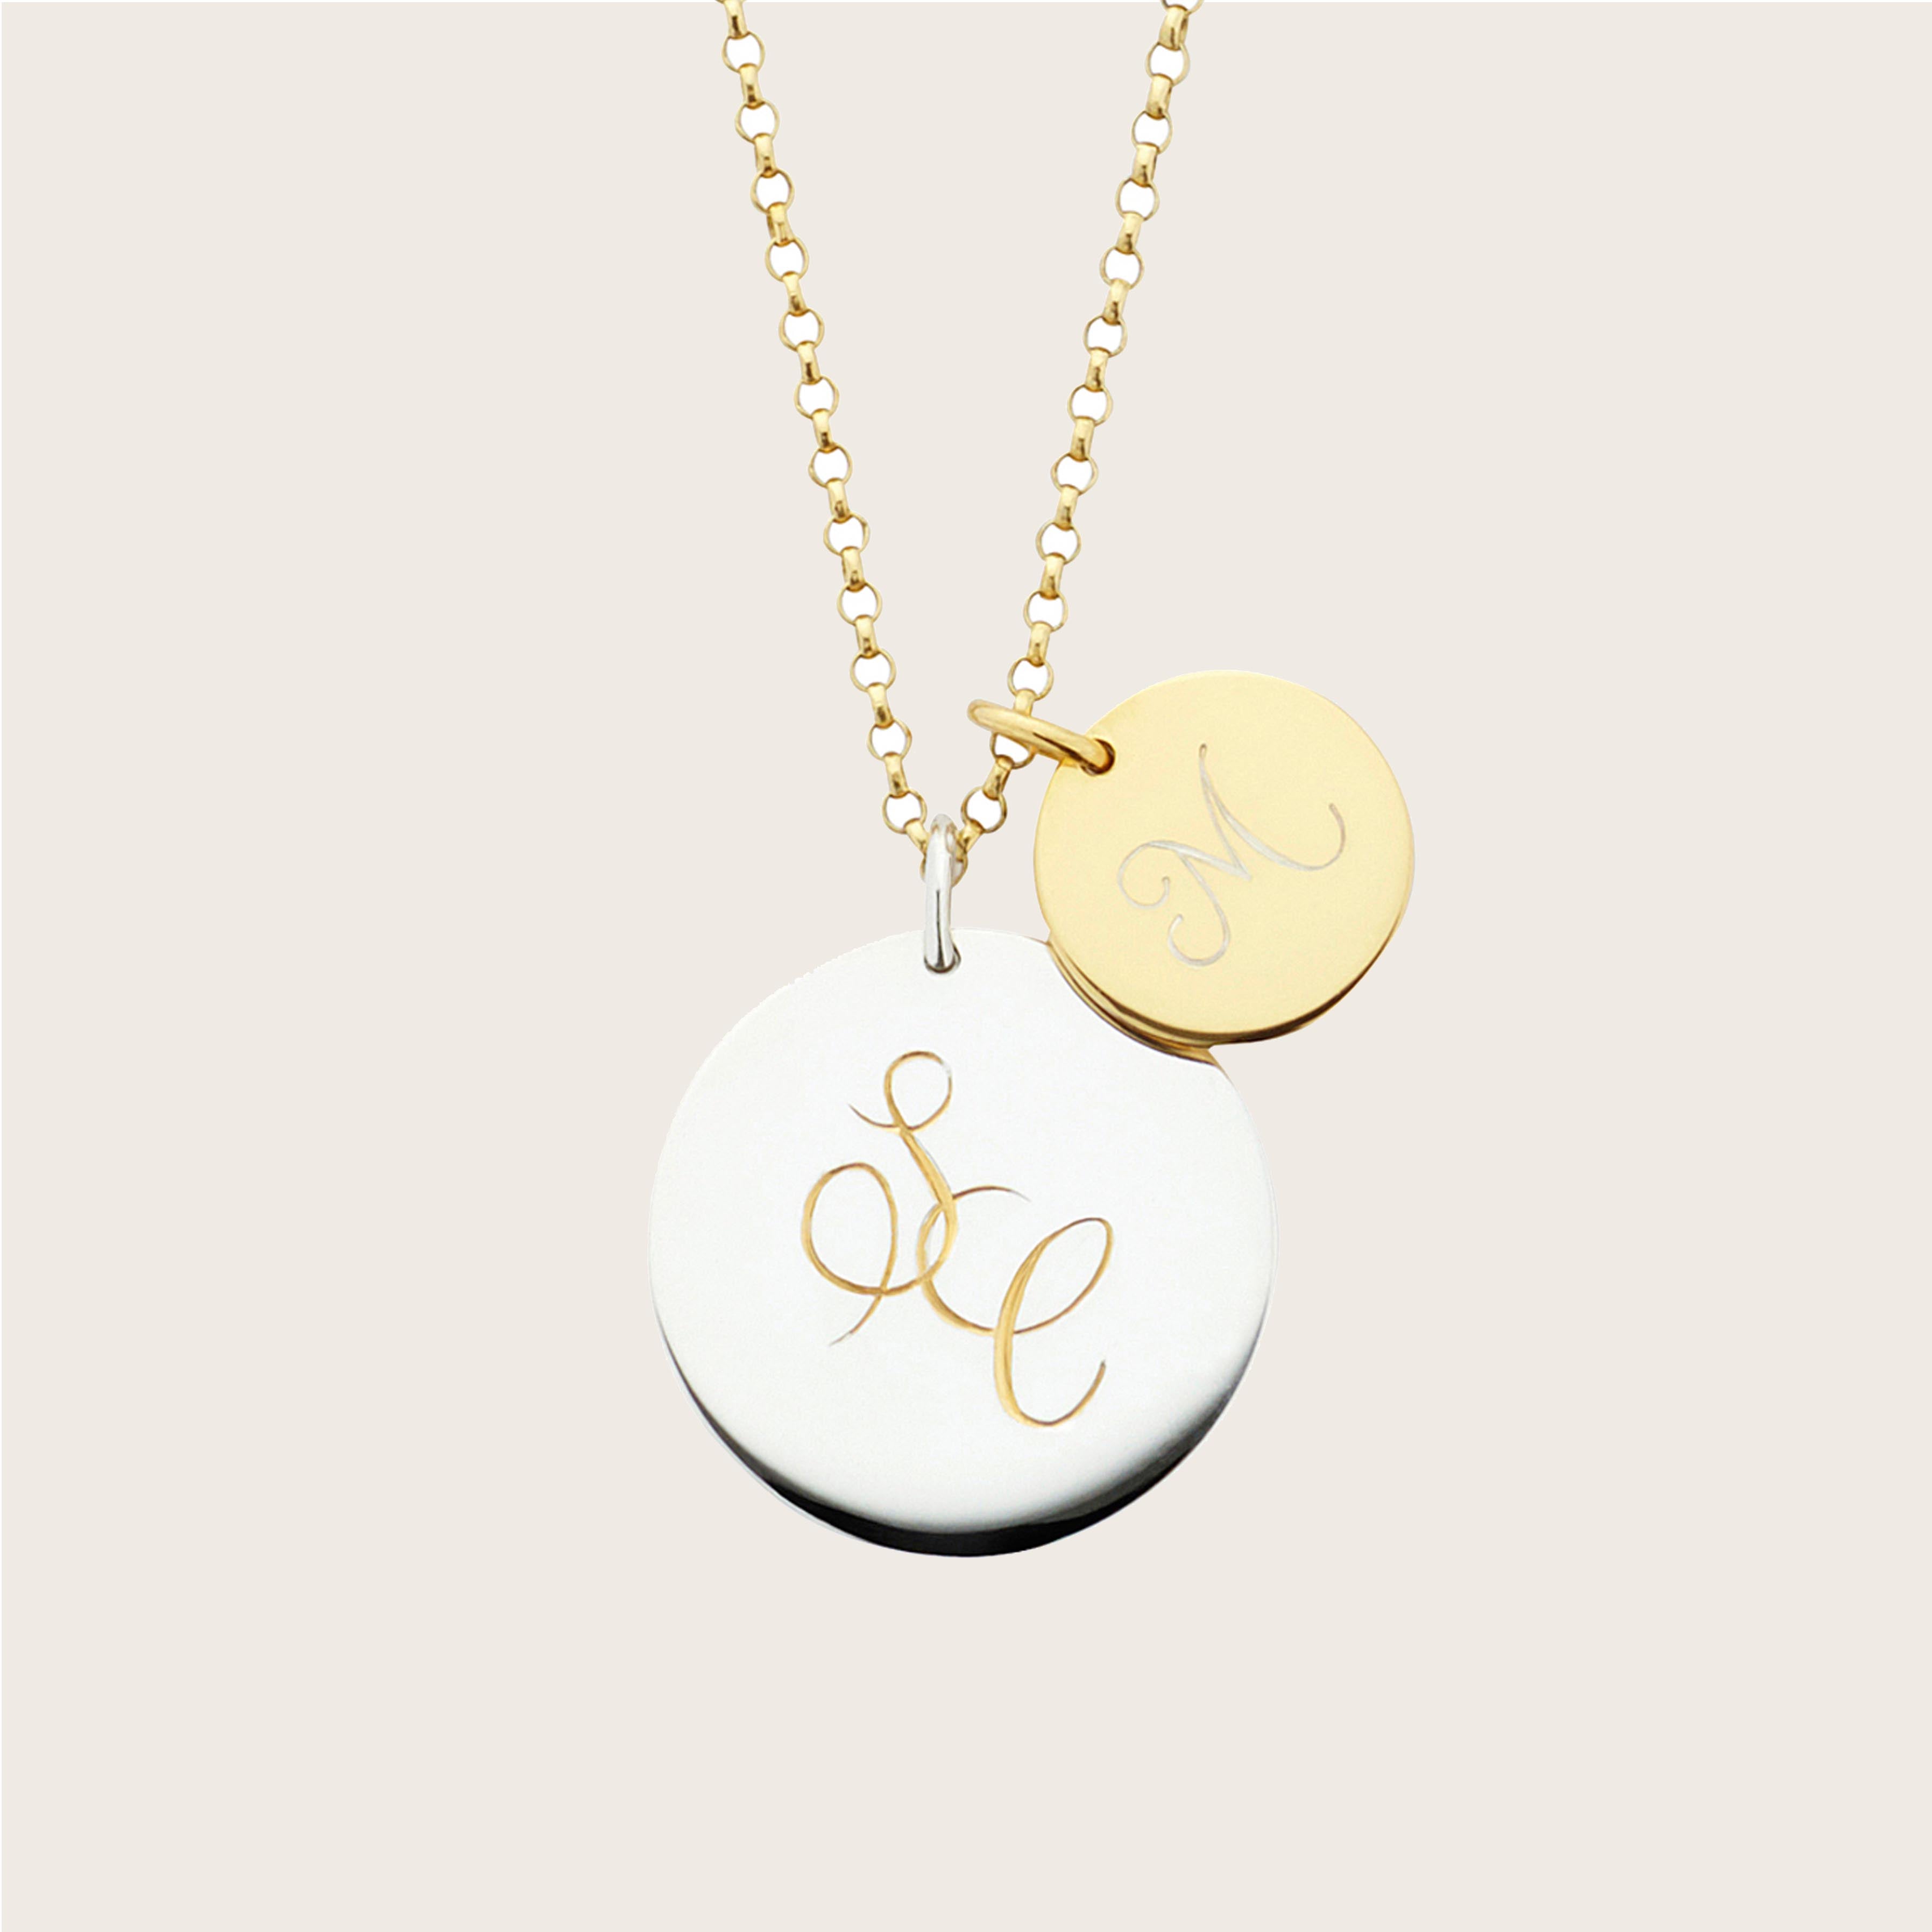 Entwined Initials Disc Necklace - harryrockslondon